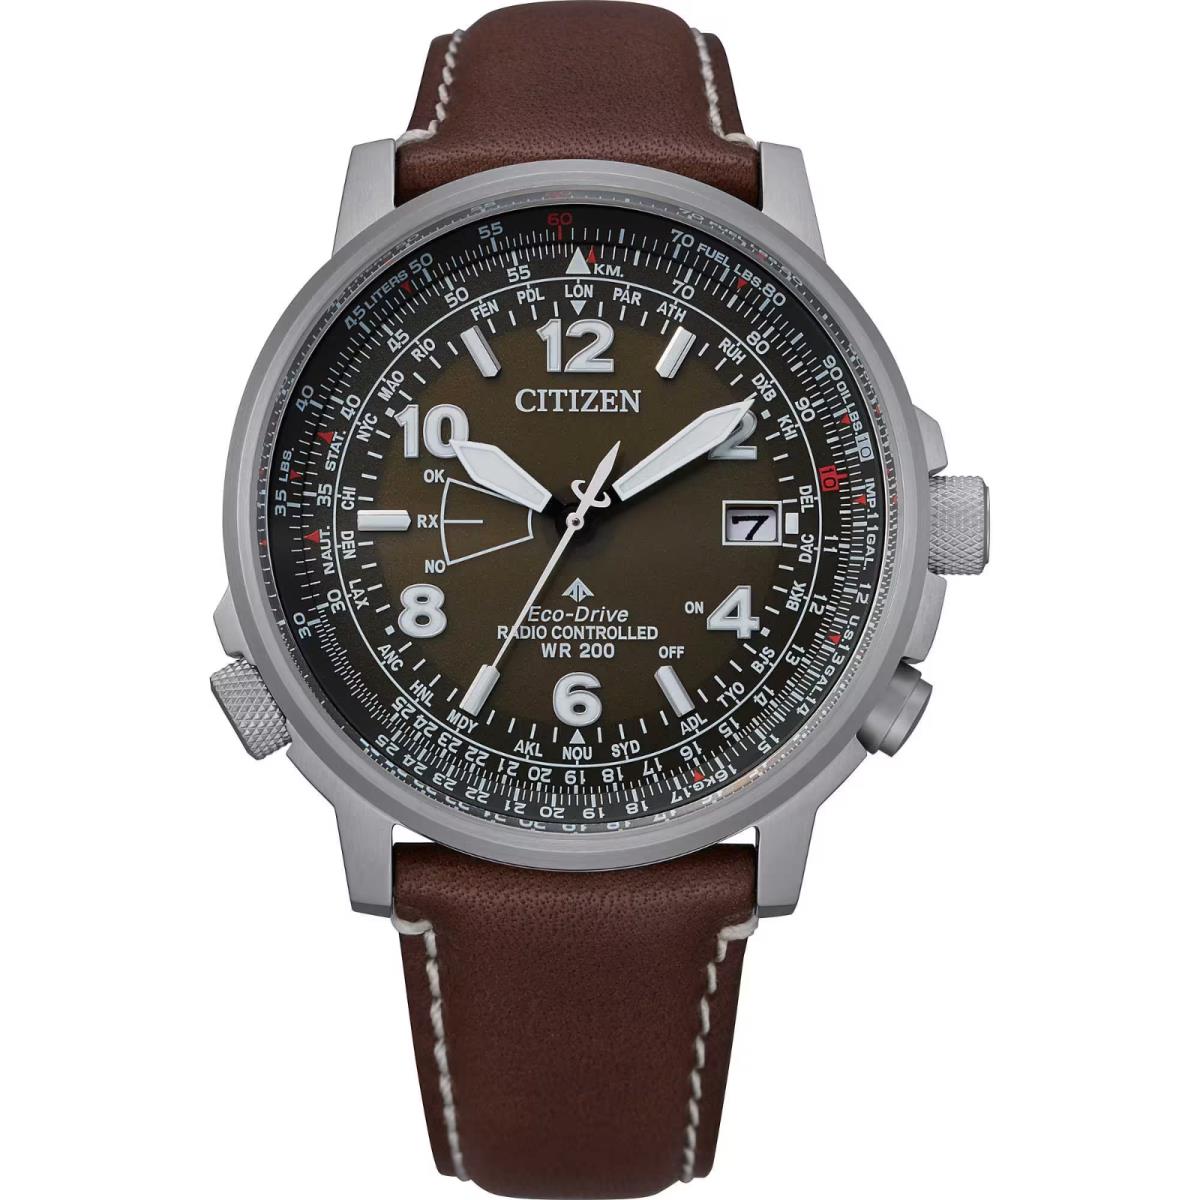 Citizen Promaster Eco-drive Air Skyhawk Sapphire CB0240-29X Leather Strap Watch - Brown Dial, Brown Band, Silver Bezel